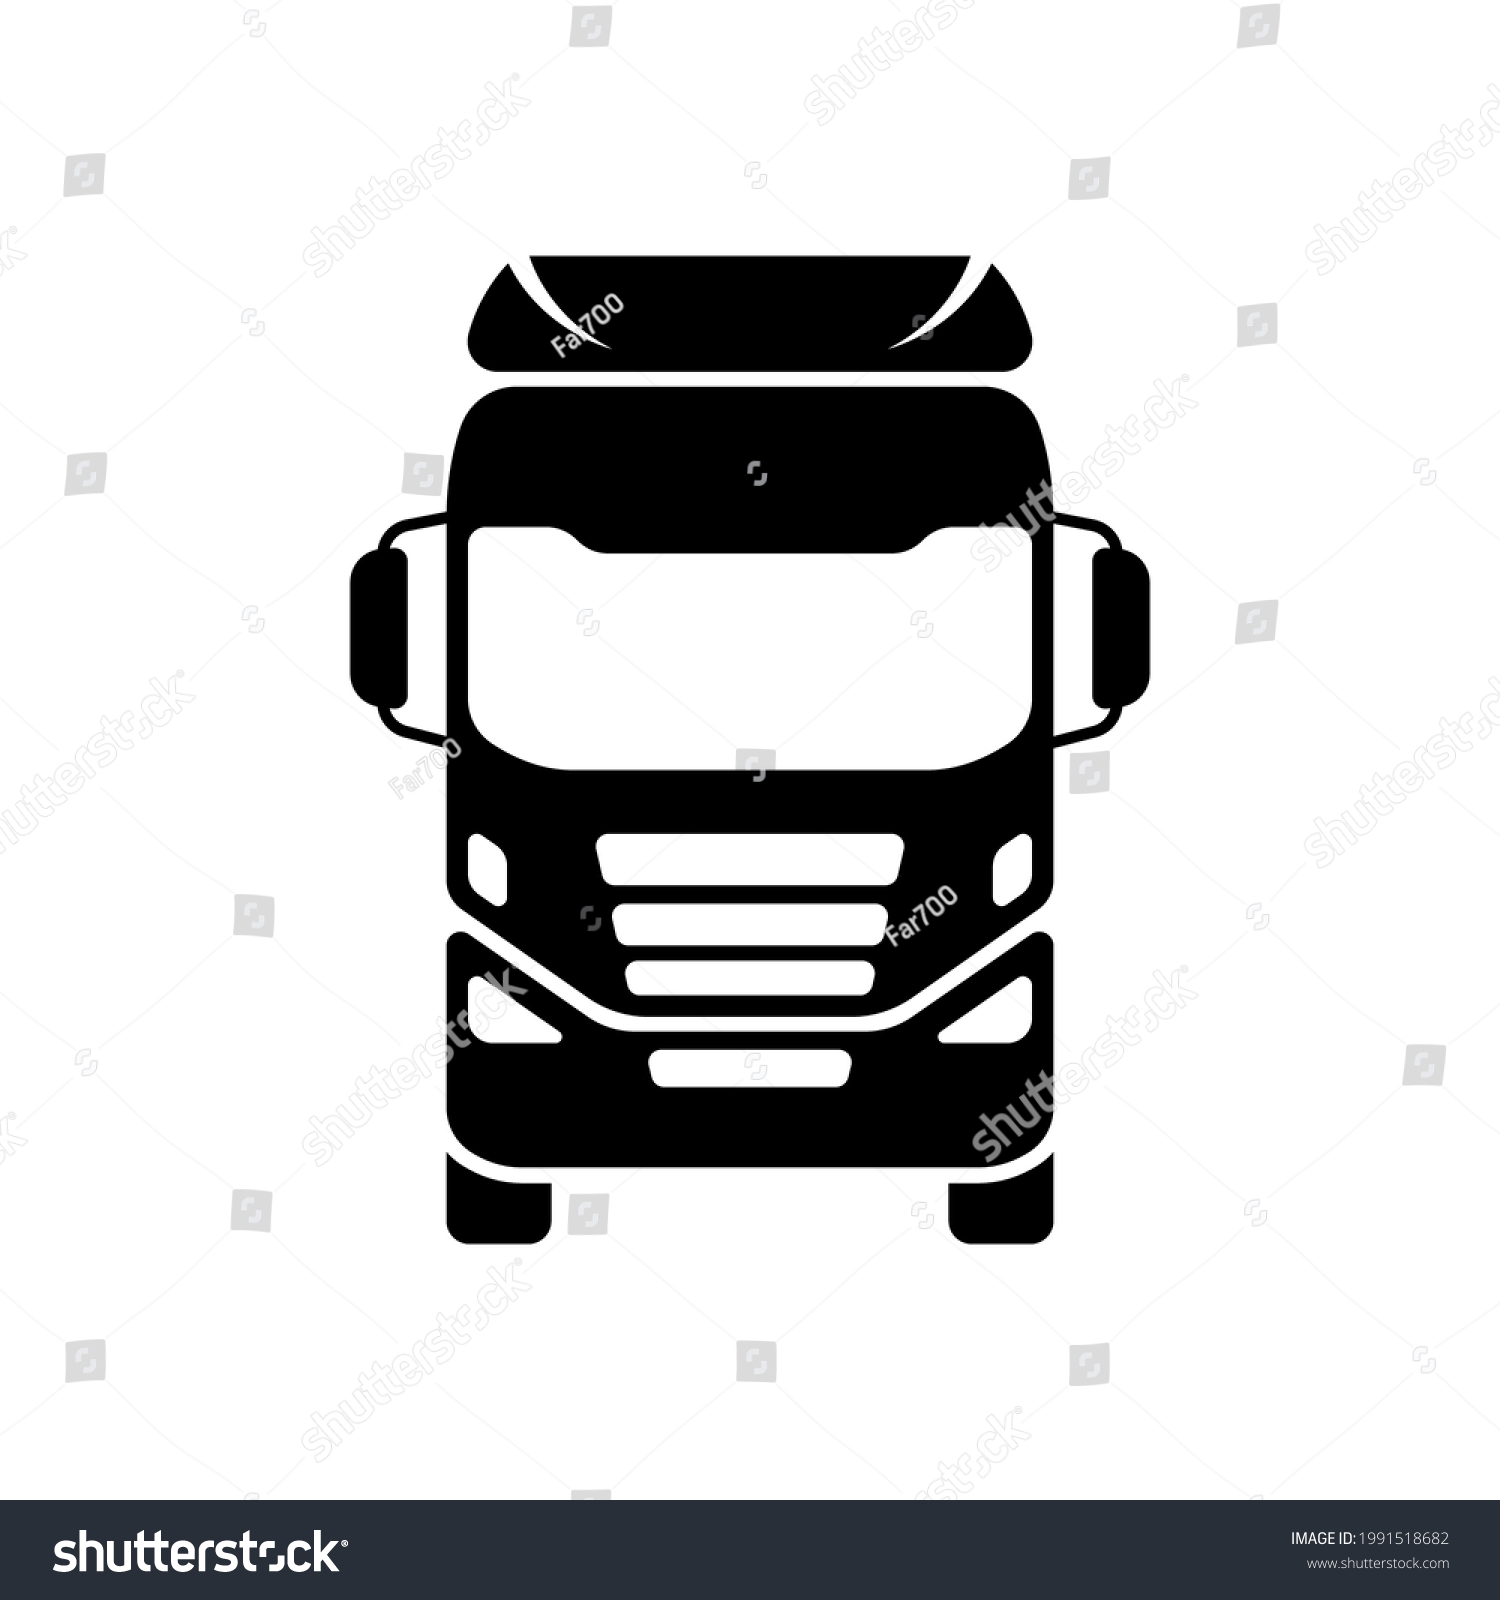 SVG of Truck icon. Trunk tractor. Black silhouette. Front view. Vector simple flat graphic illustration. The isolated object on a white background. Isolate. svg